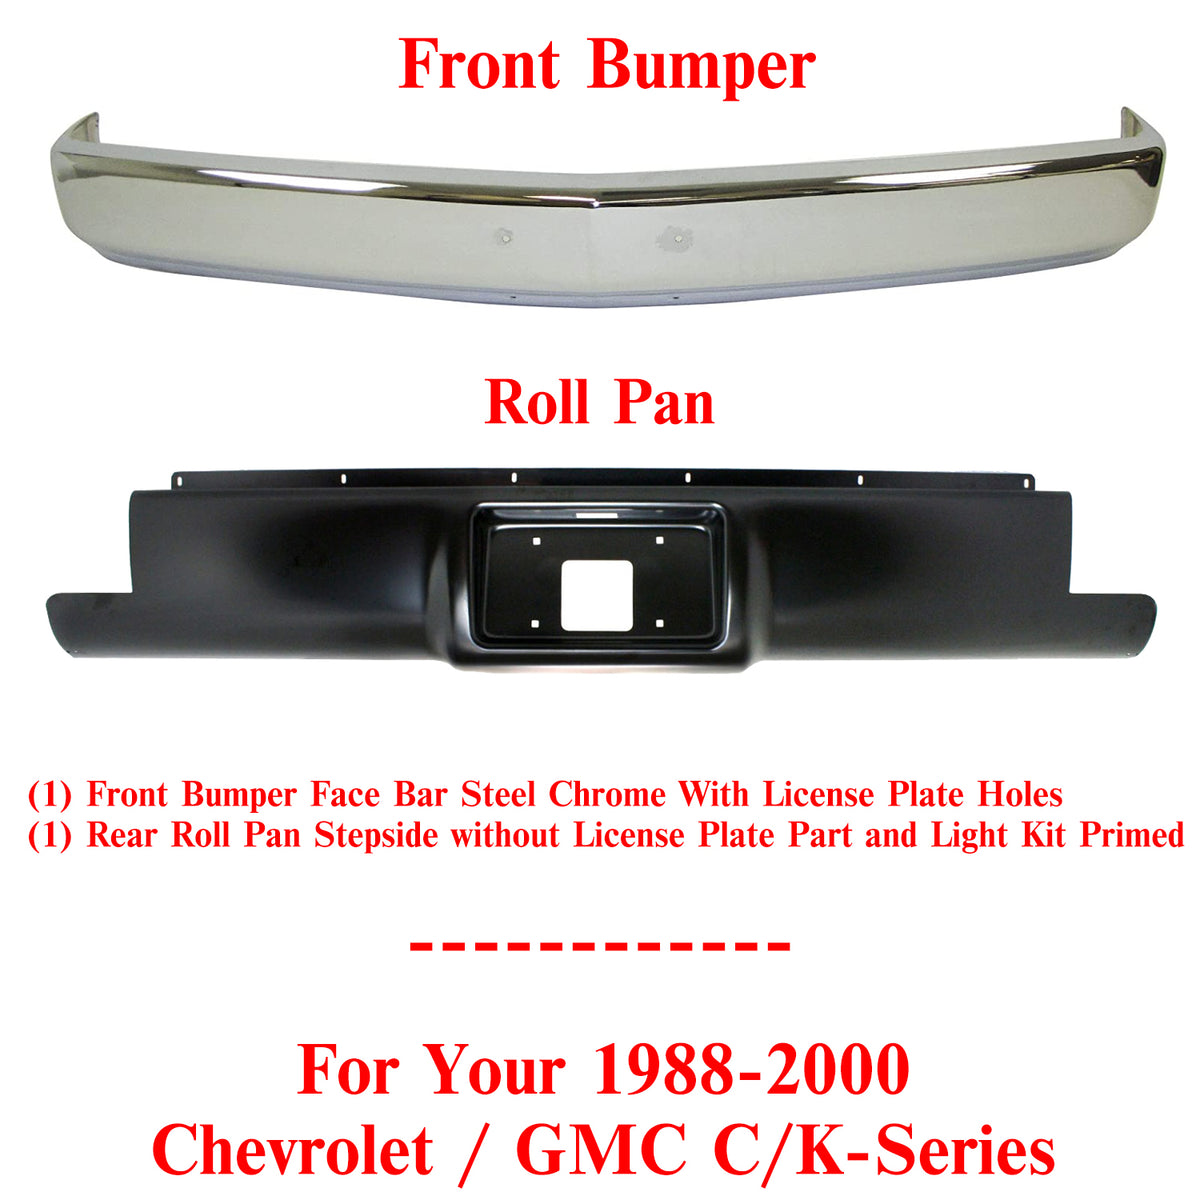 Front Bumper Chrome Steel With License Plate Holes + Rear Roll Pan